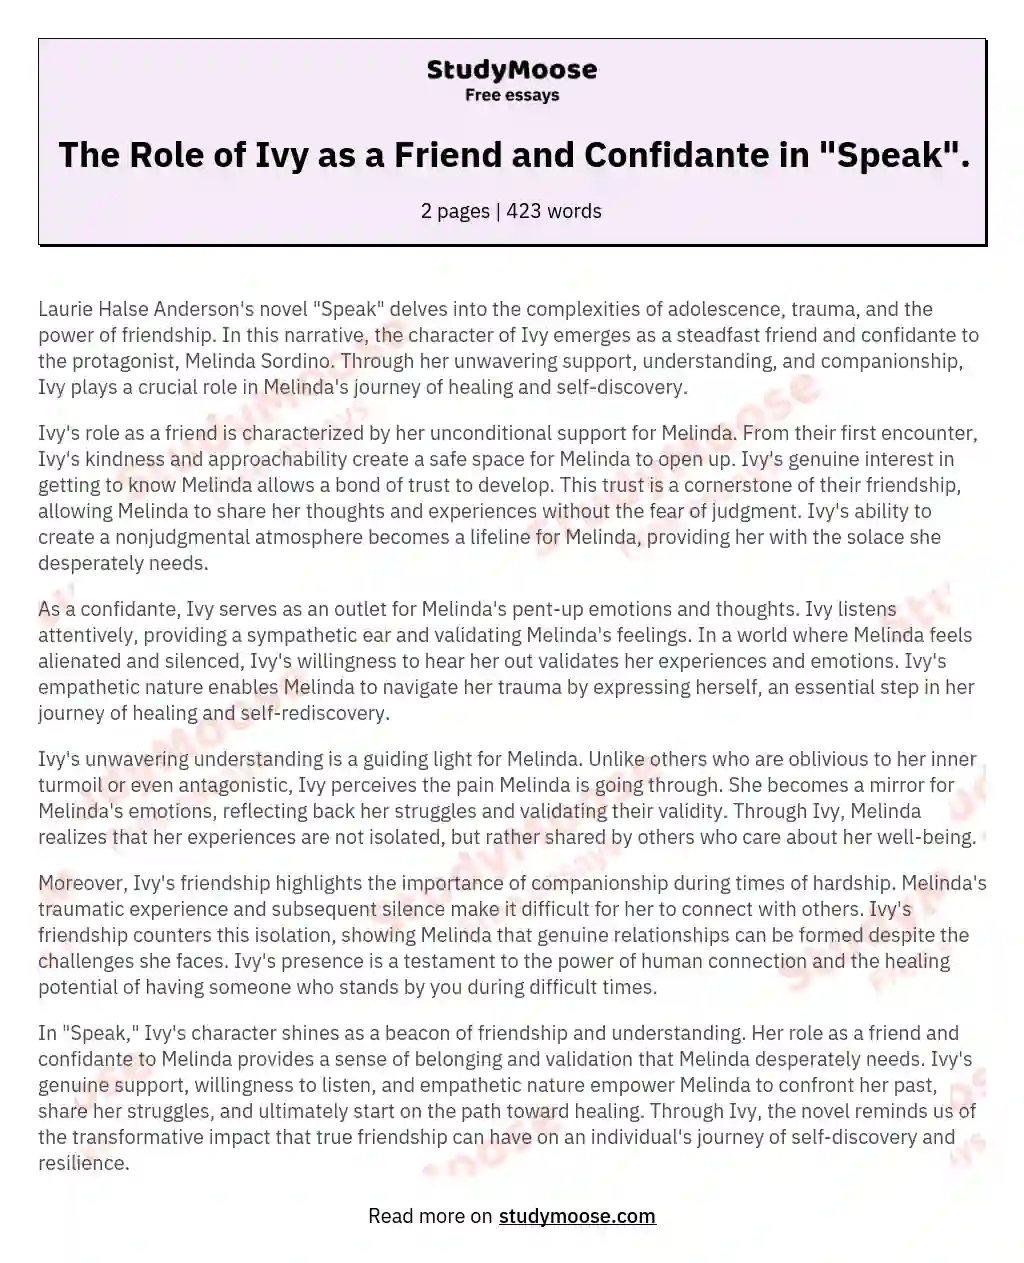 The Role of Ivy as a Friend and Confidante in "Speak". essay